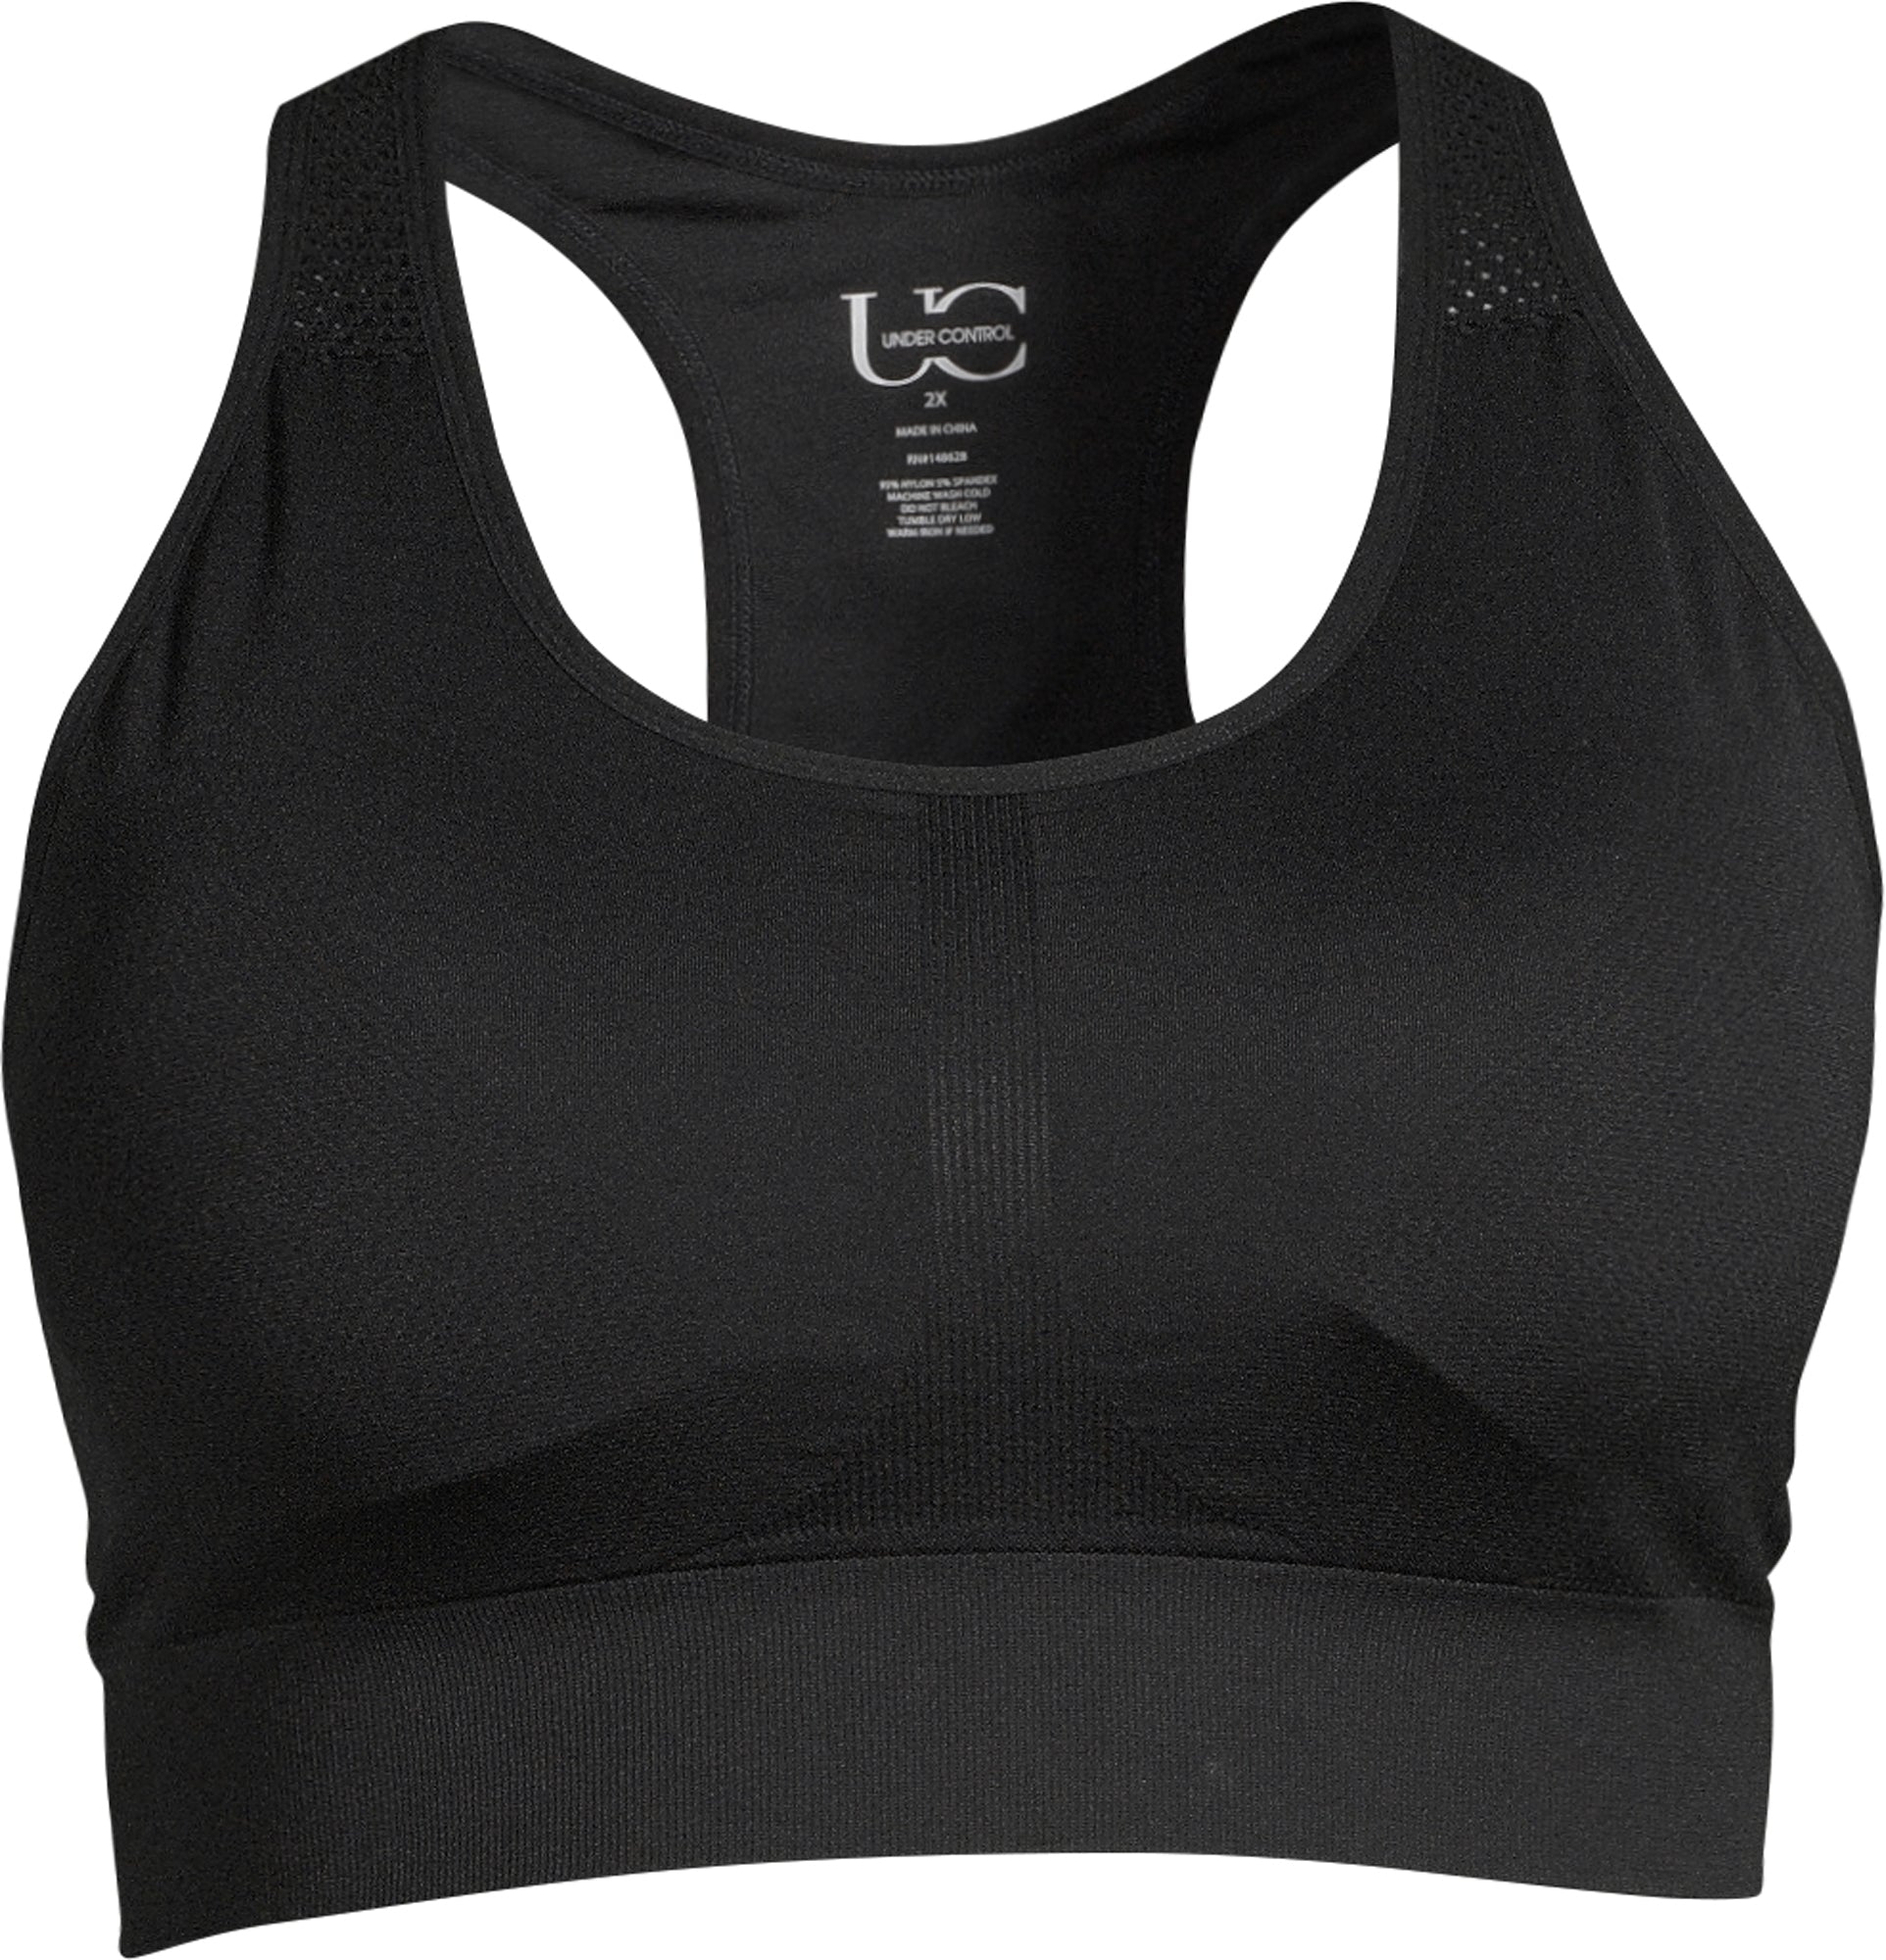 Athletic Bra By Ideology Size: 2x